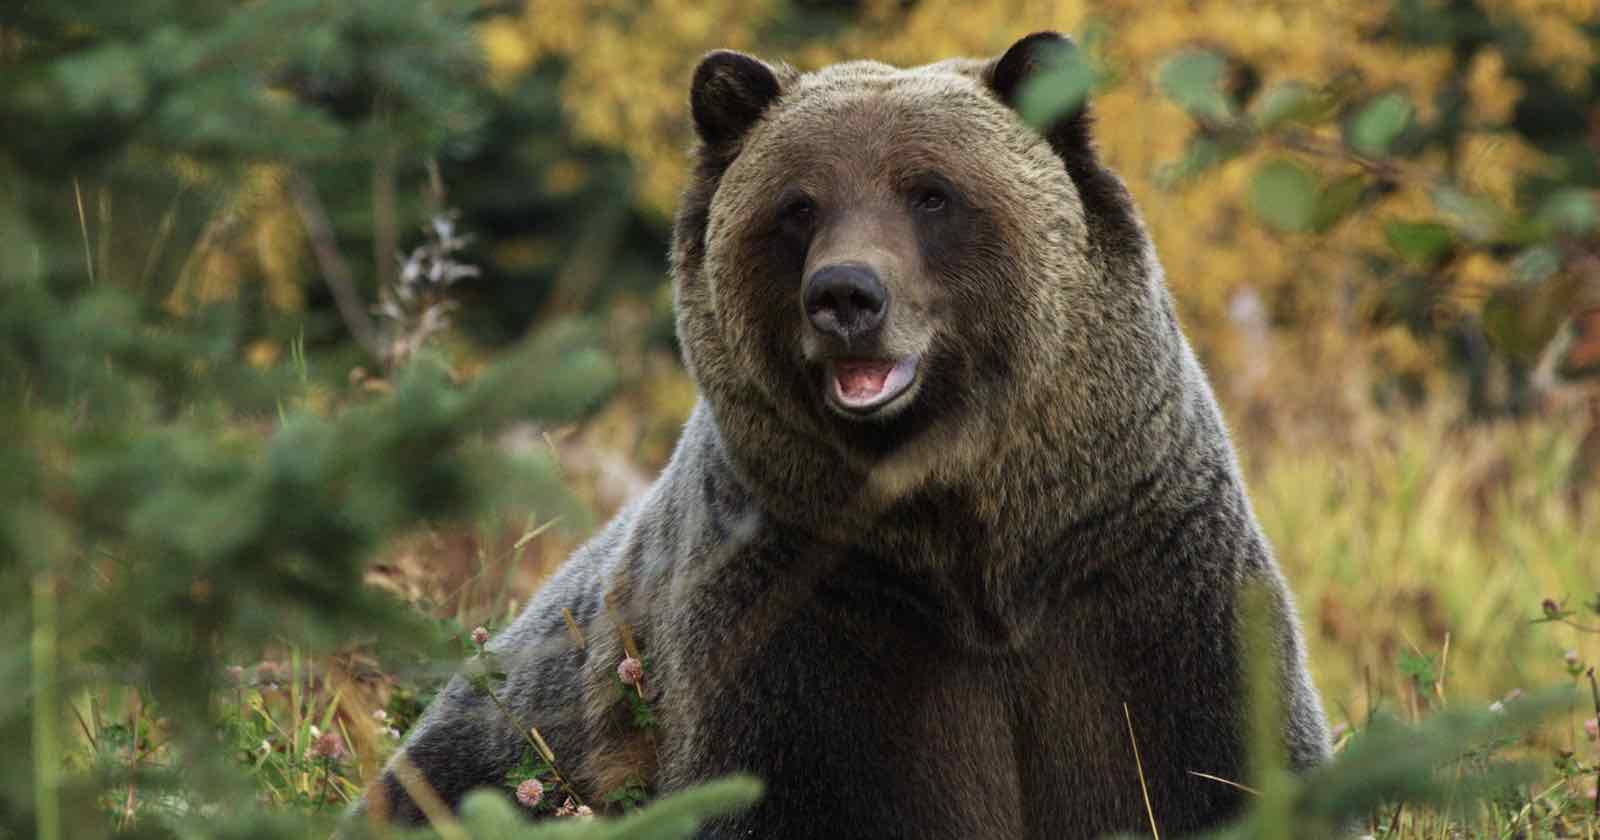 Photographer Mauled by Grizzly Bear in ‘Surprise’ Encounter